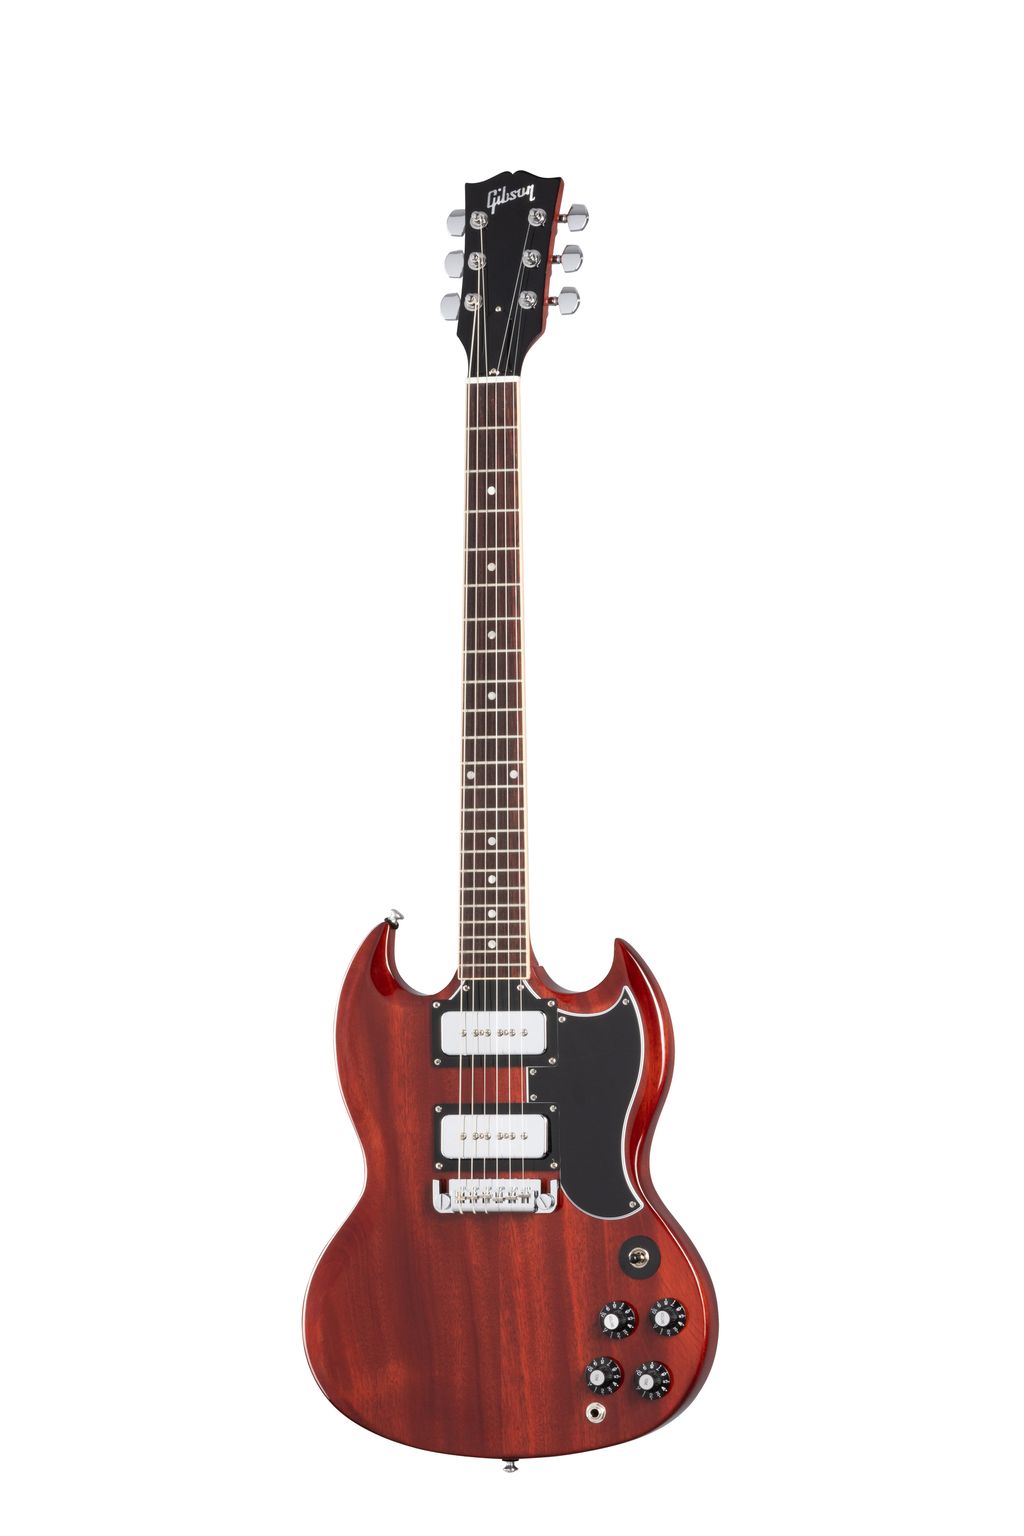 __static.gibson.com_product-images_USA_USAH24673_Vintage_Cherry_SGT121VECH1_front5